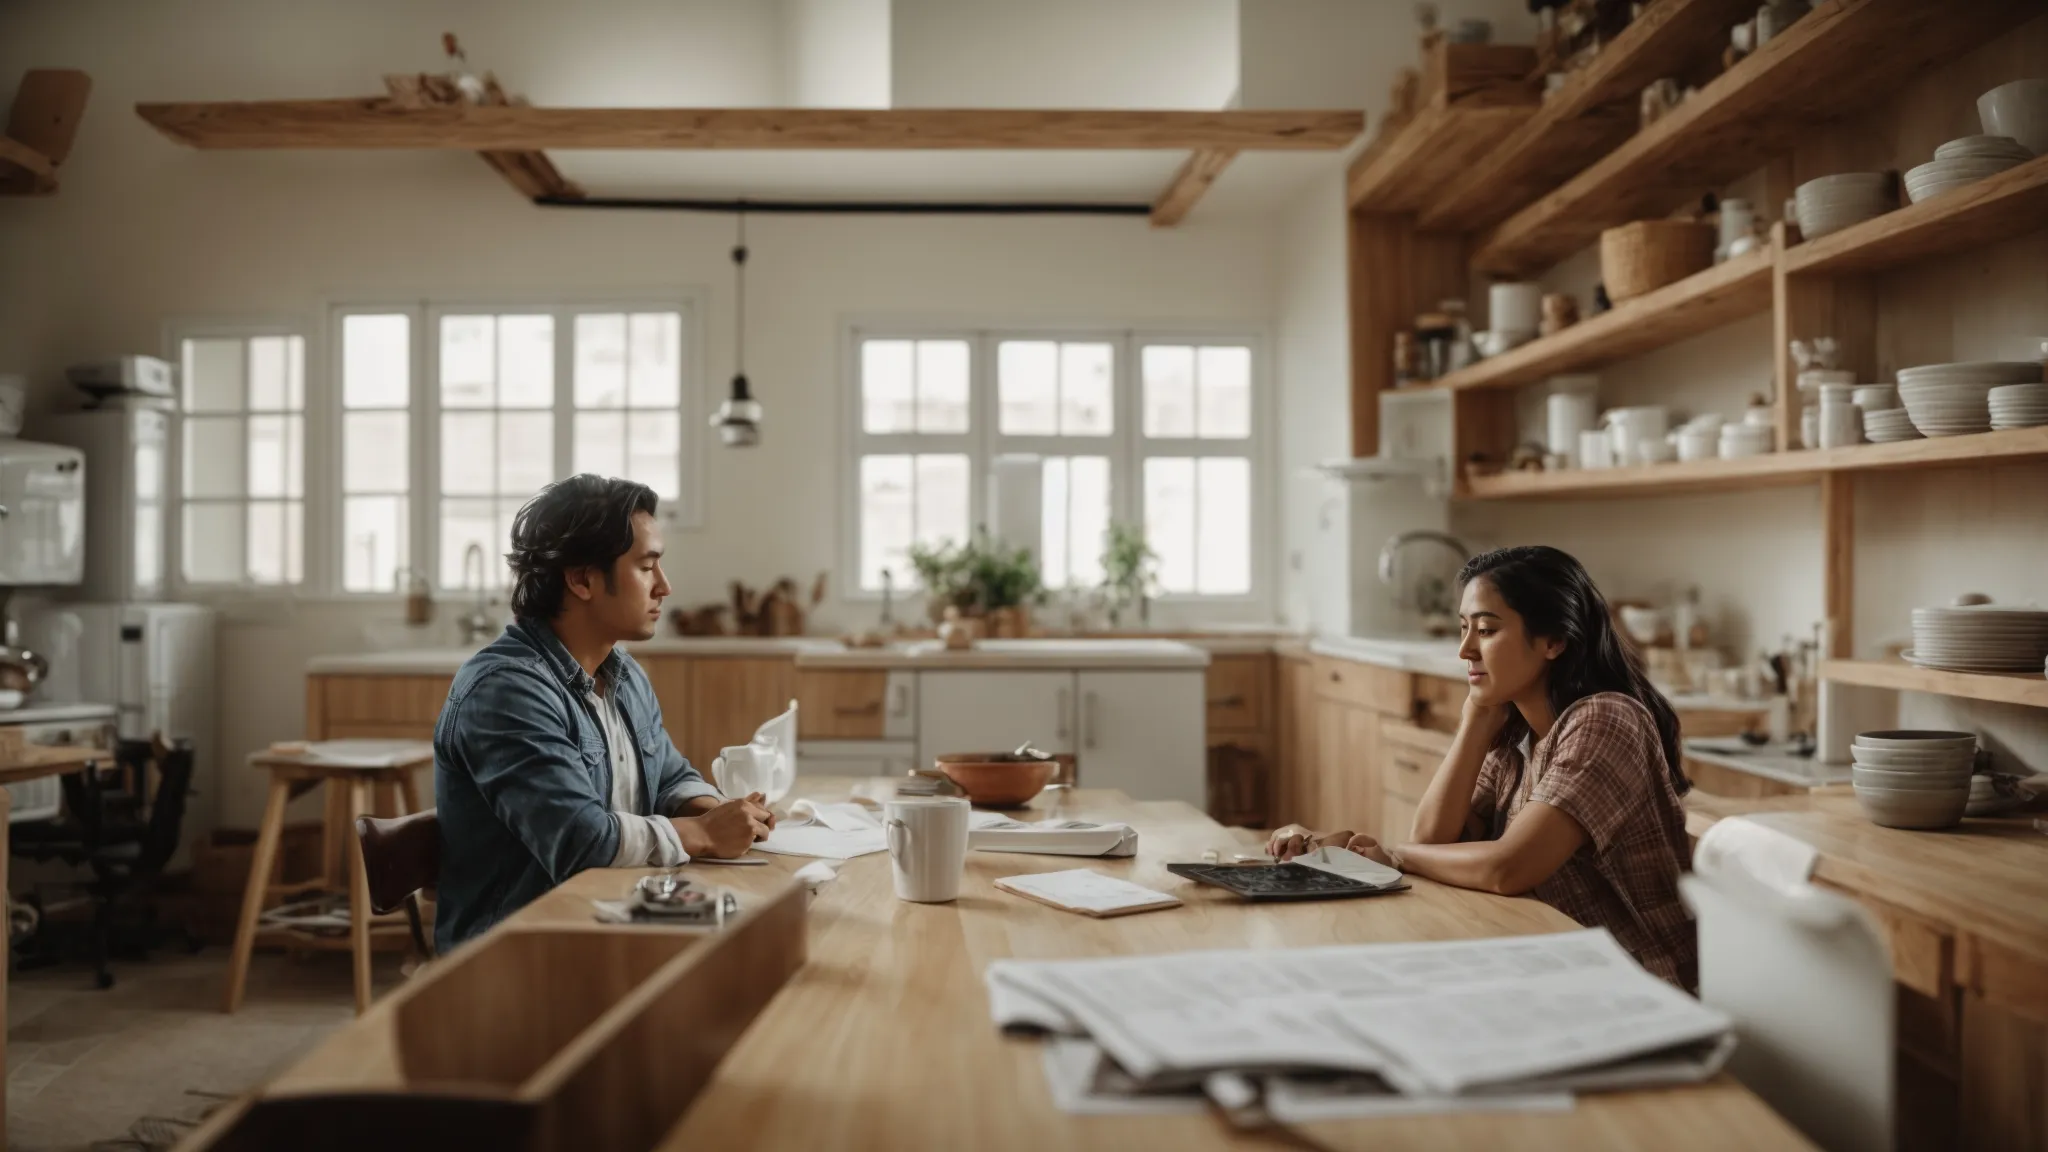 a couple is sitting at a kitchen table, surrounded by renovation plans and a calculator, deeply engrossed in discussion.